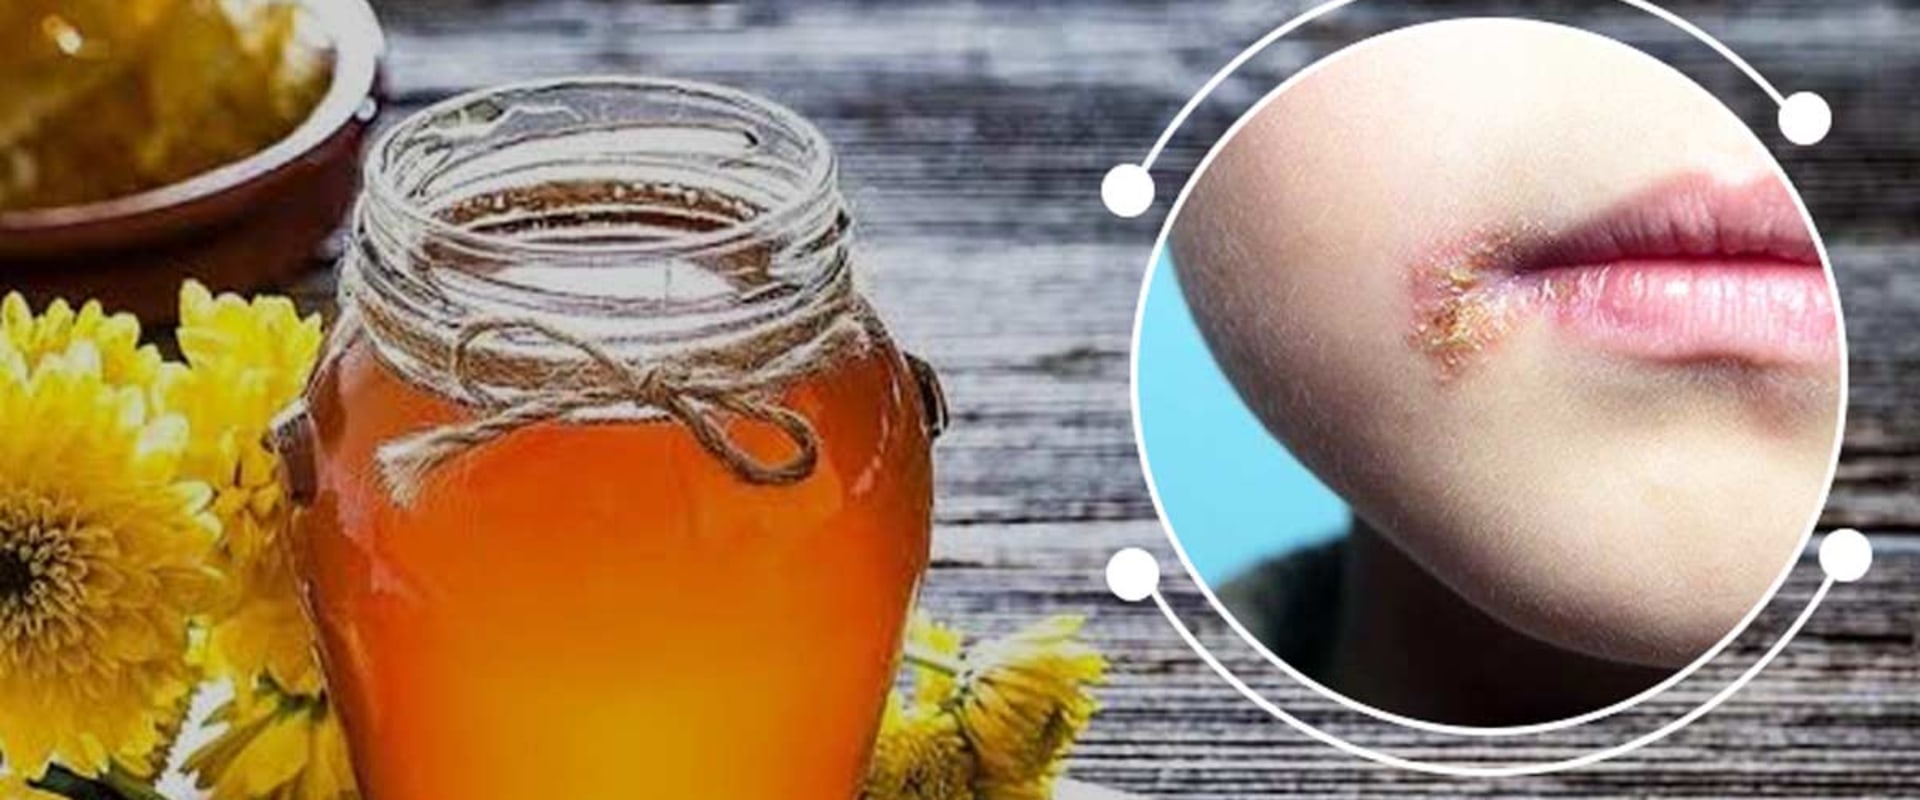 Honey and Lemon Juice Mixture: Home Remedies for Herpes Lips